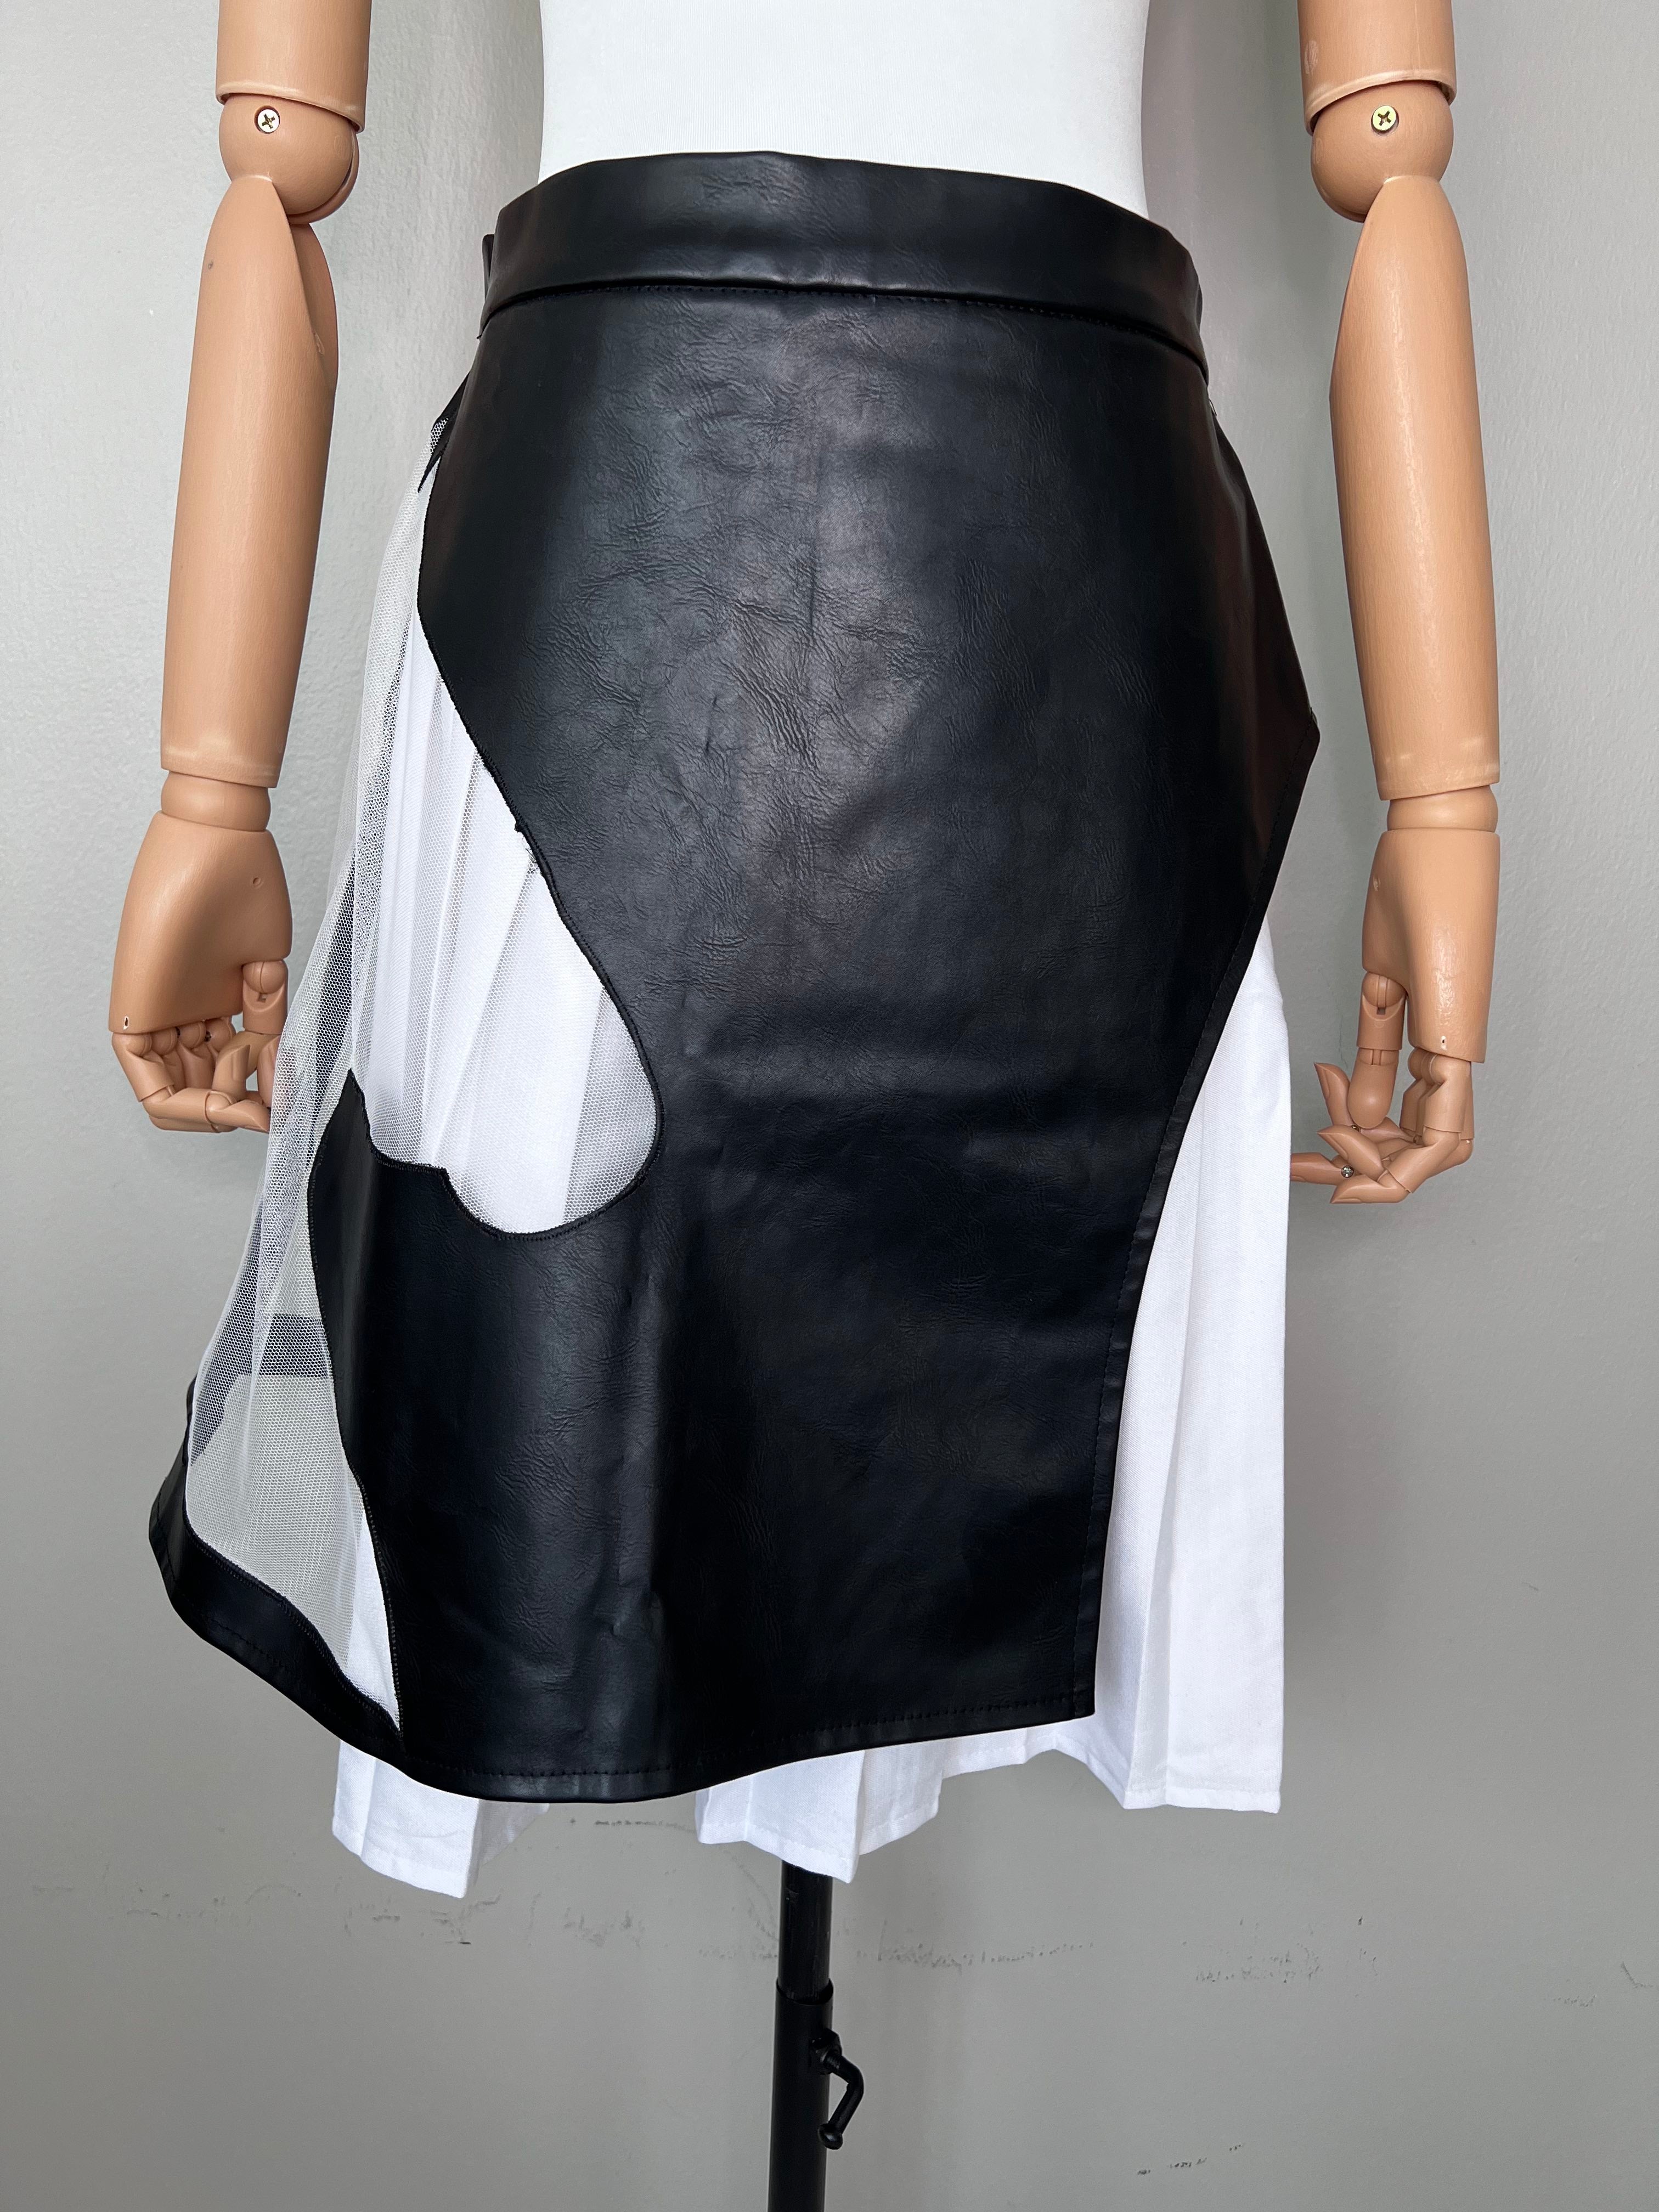 Short pleated white underskirt with leather skirt that has a horse cut out on the side. - MAMZI.